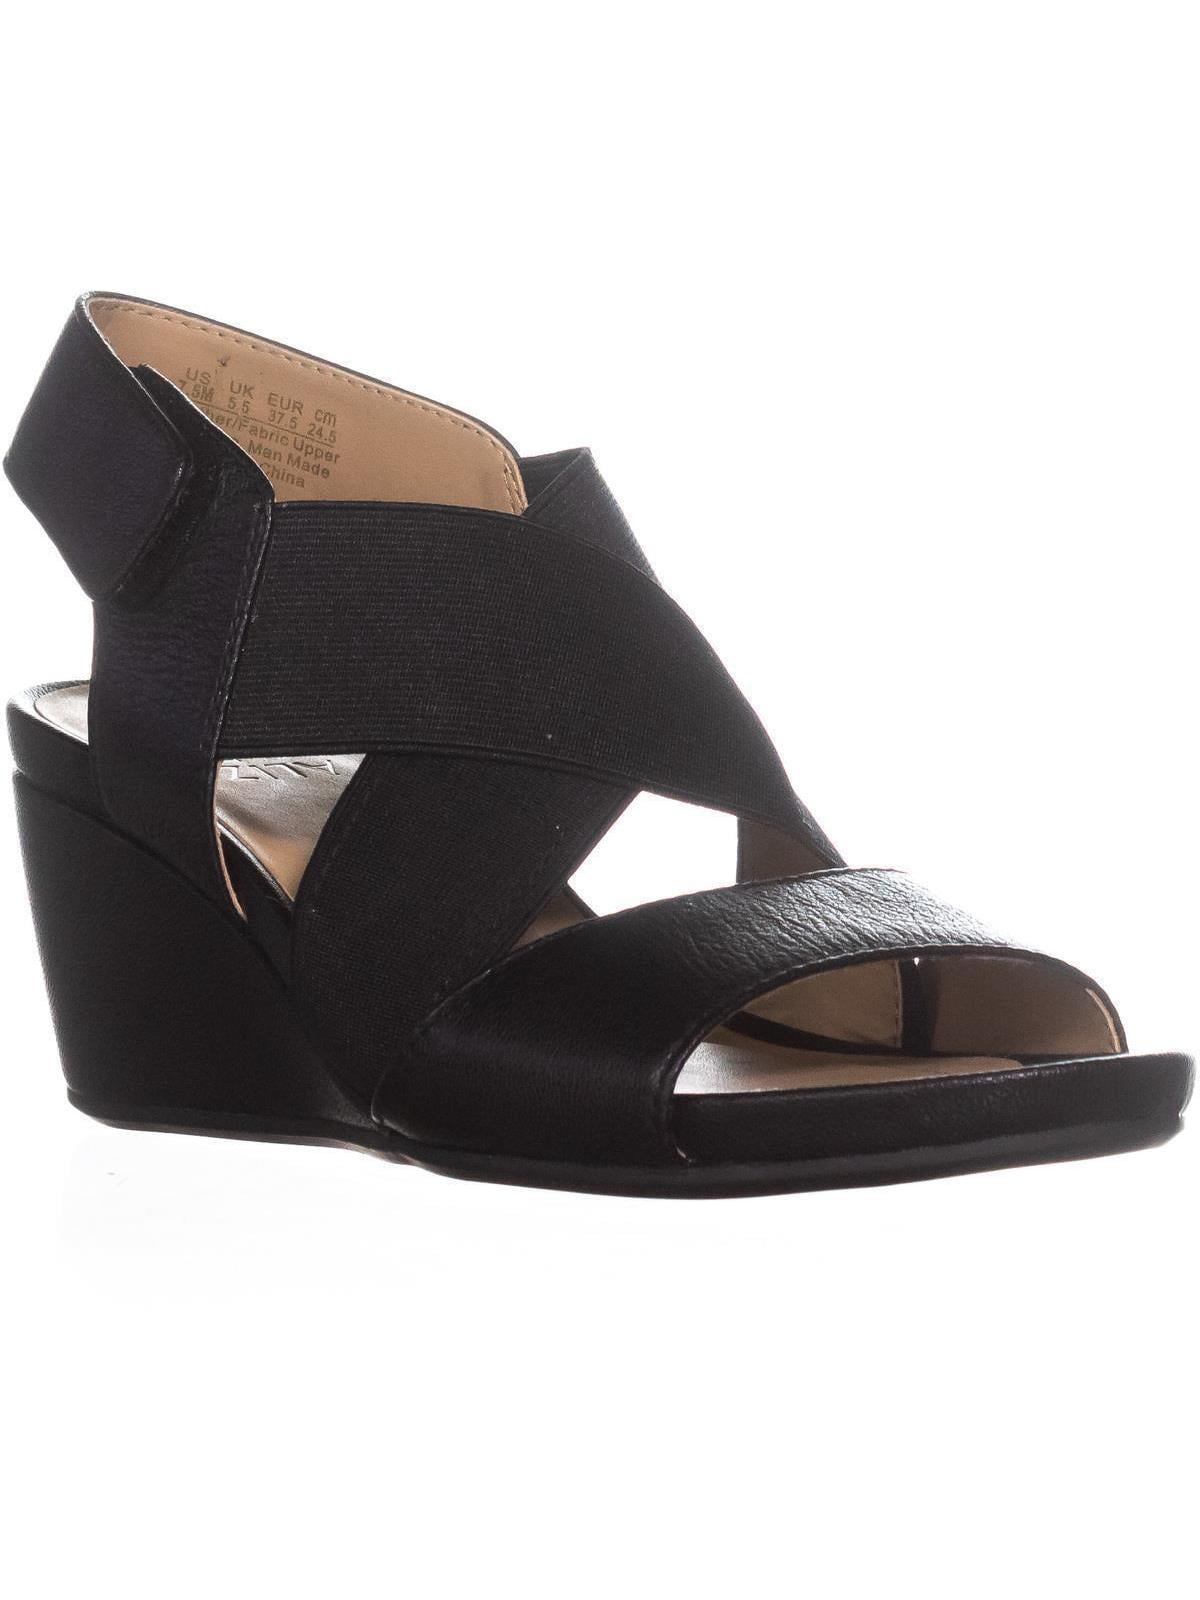 Womens naturalizer Cleo Wedge Strappy Sandals, Black Leather - Walmart.com